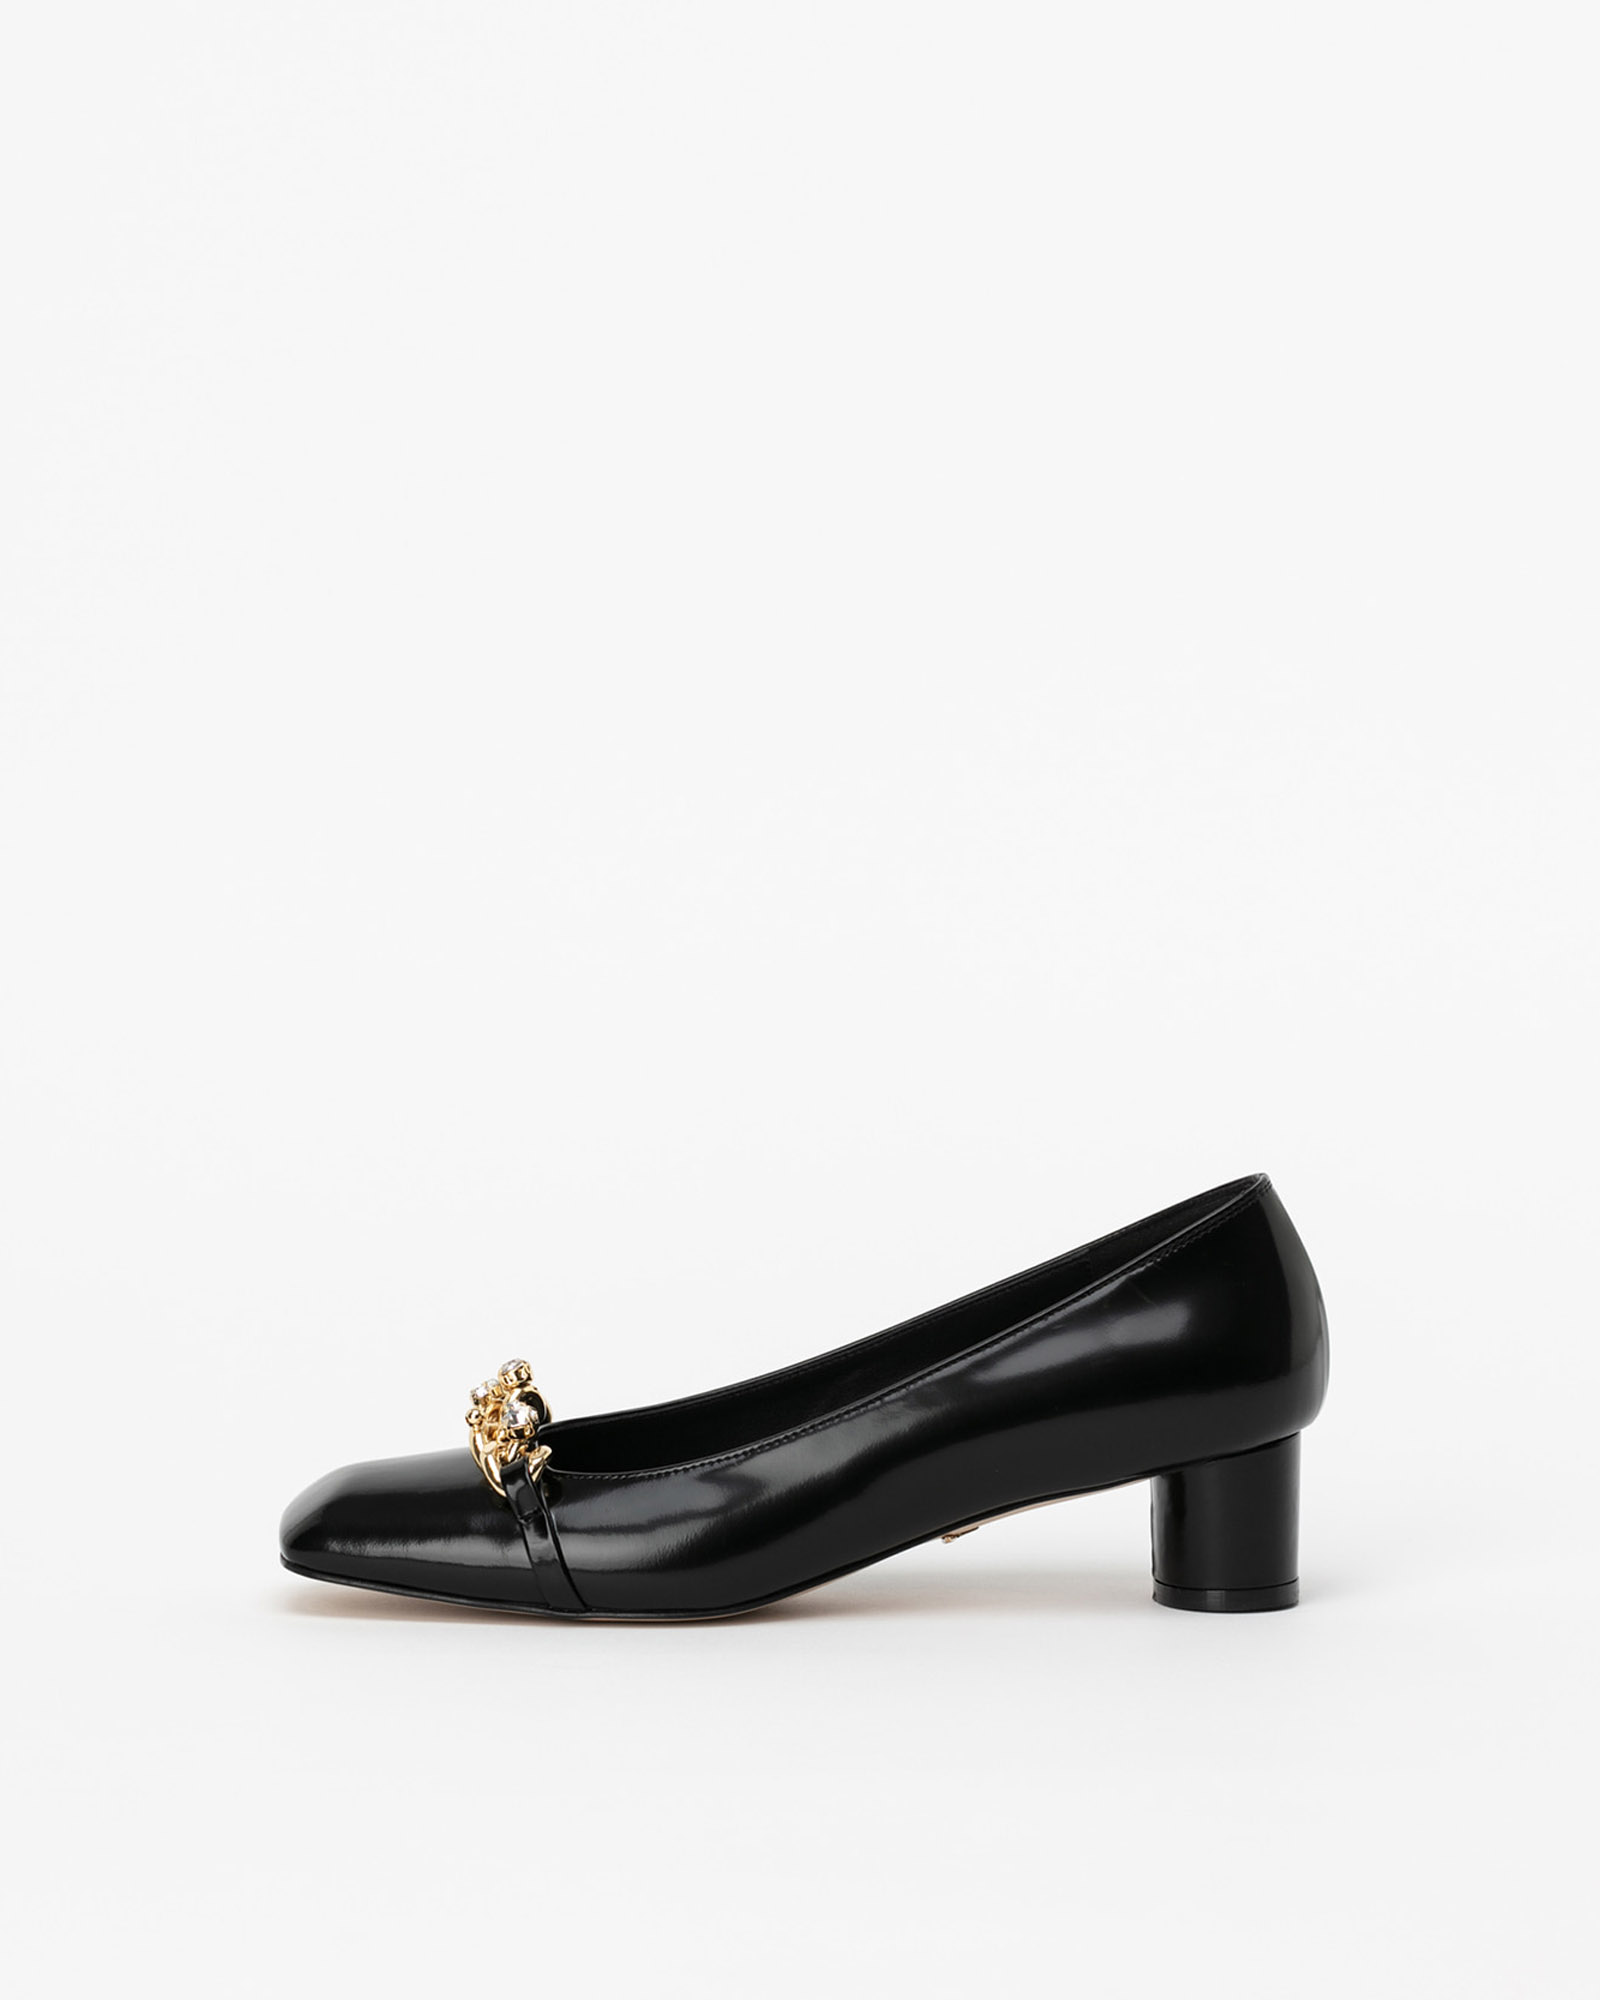 Moltani Embellished Chain Pumps in Black Box